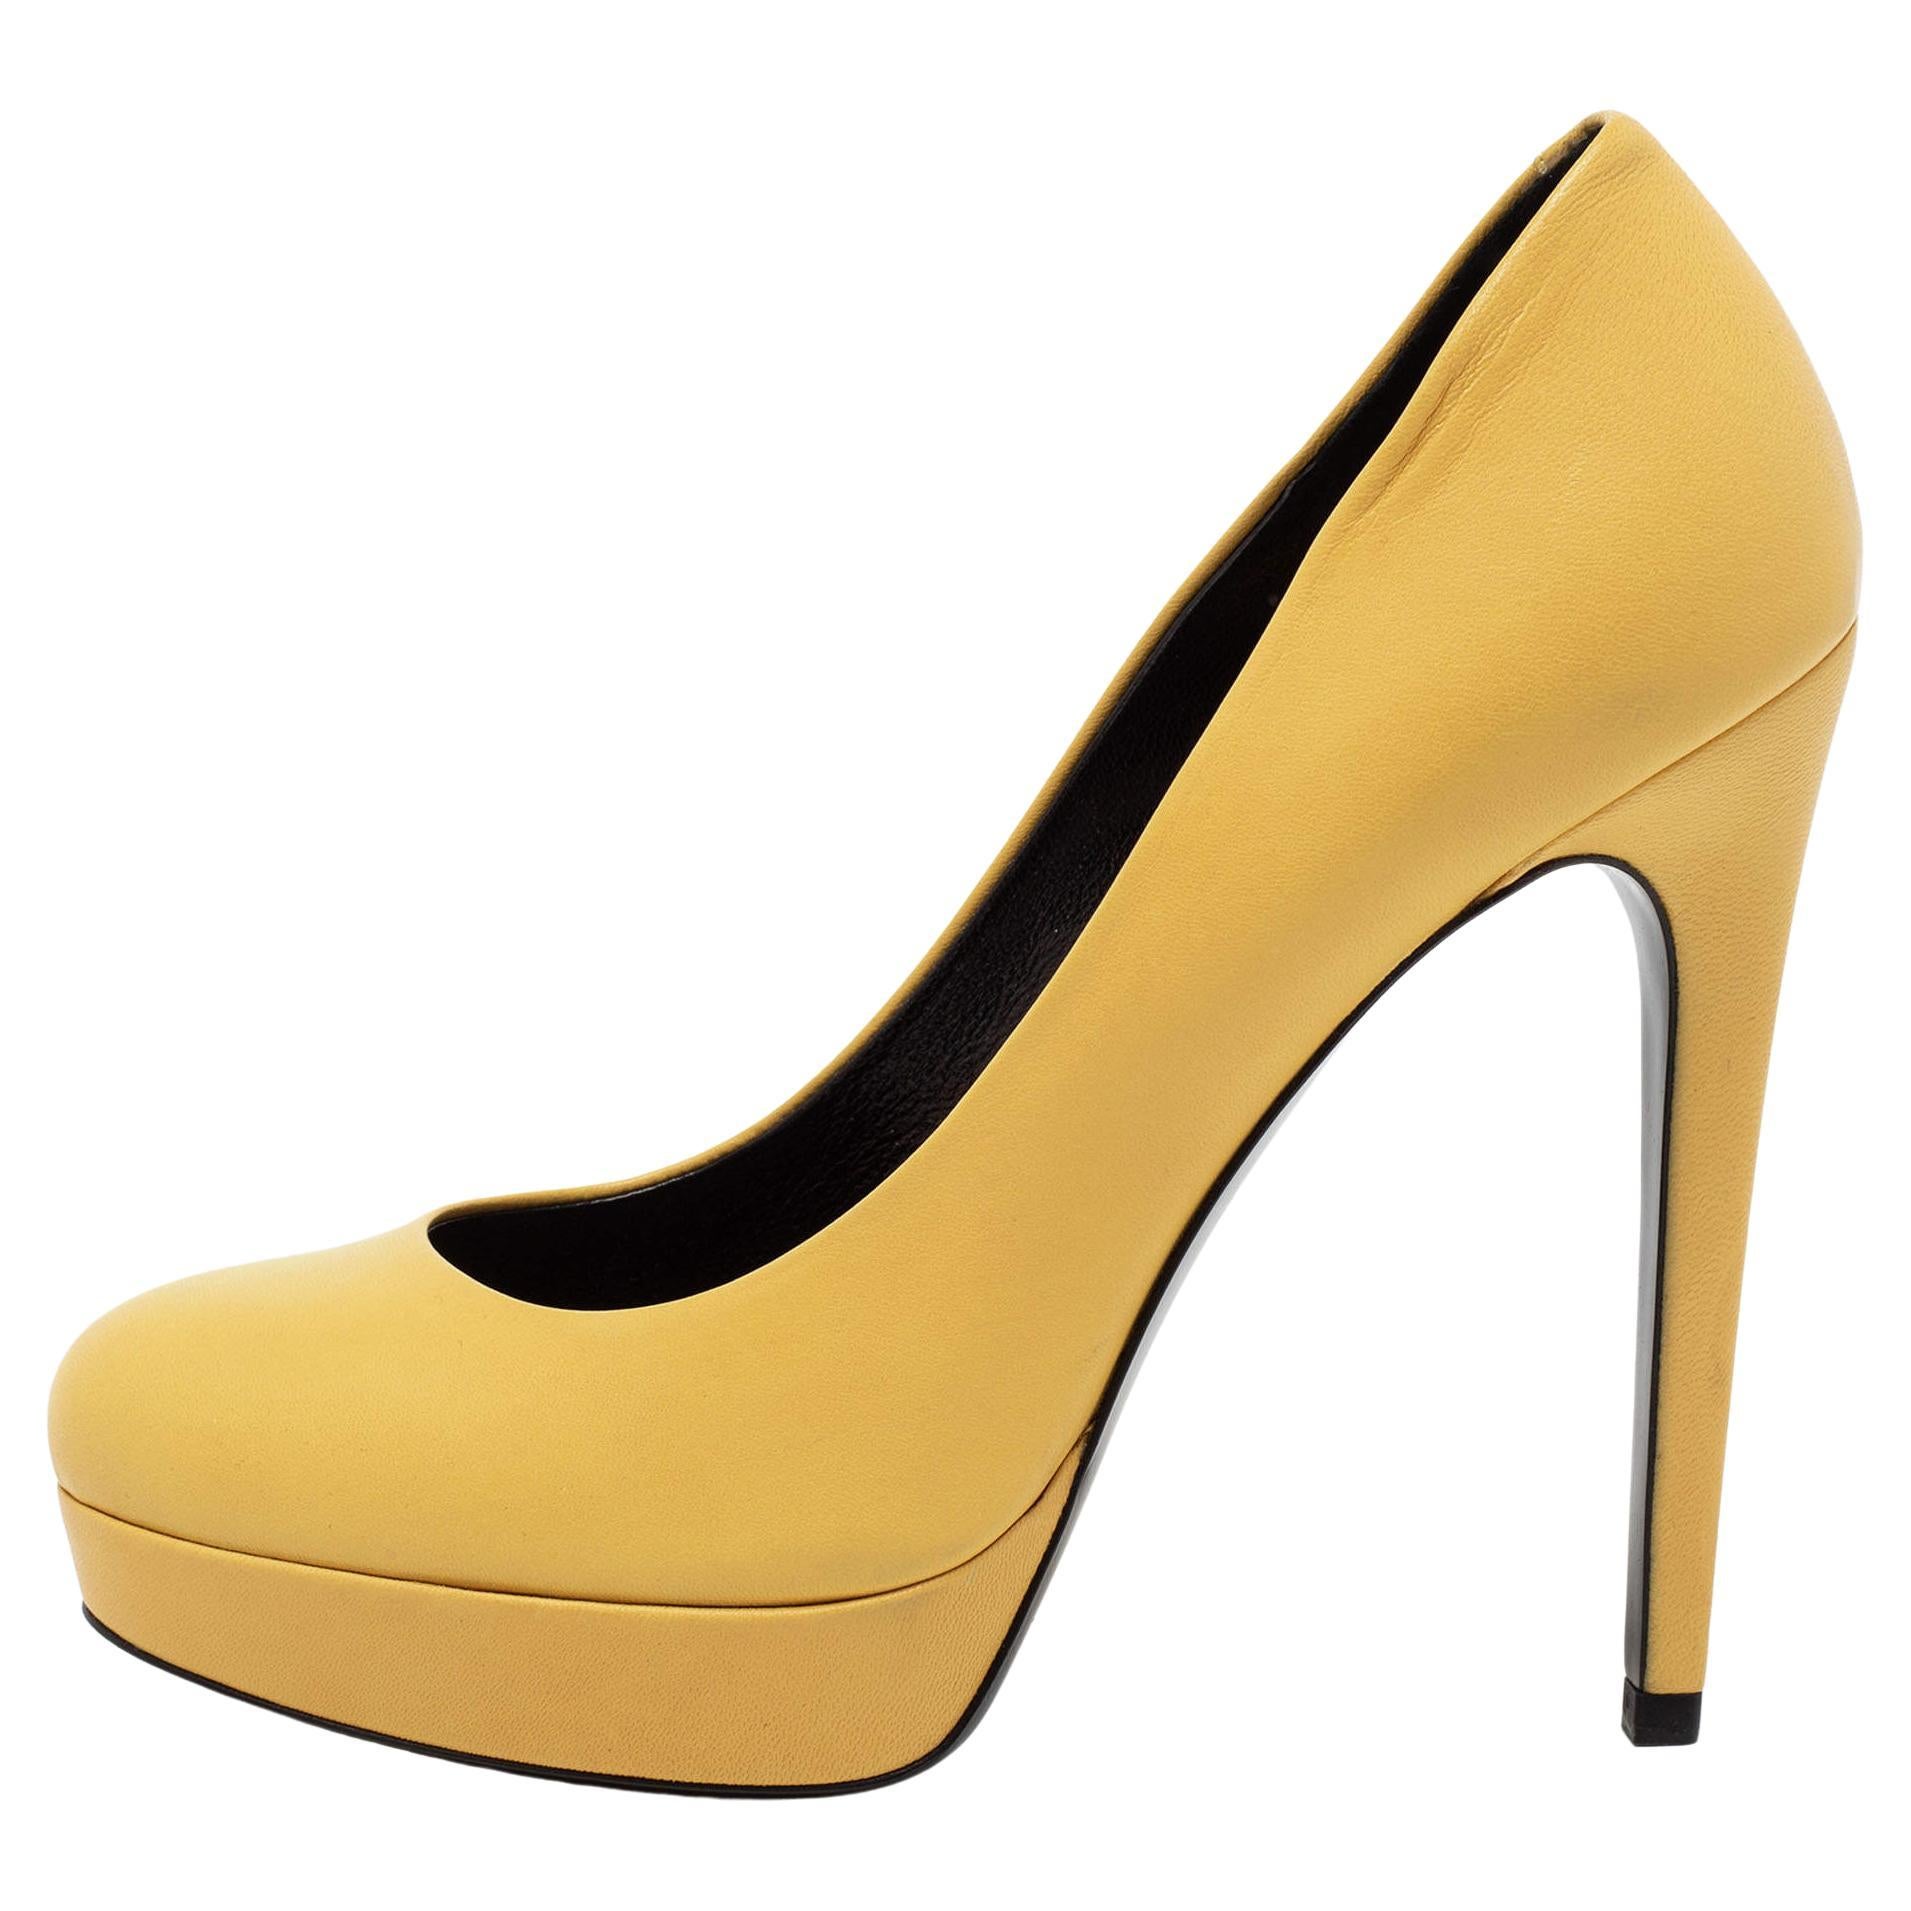 Barbara Bui Yellow Leather Platform Pumps Size 38 For Sale